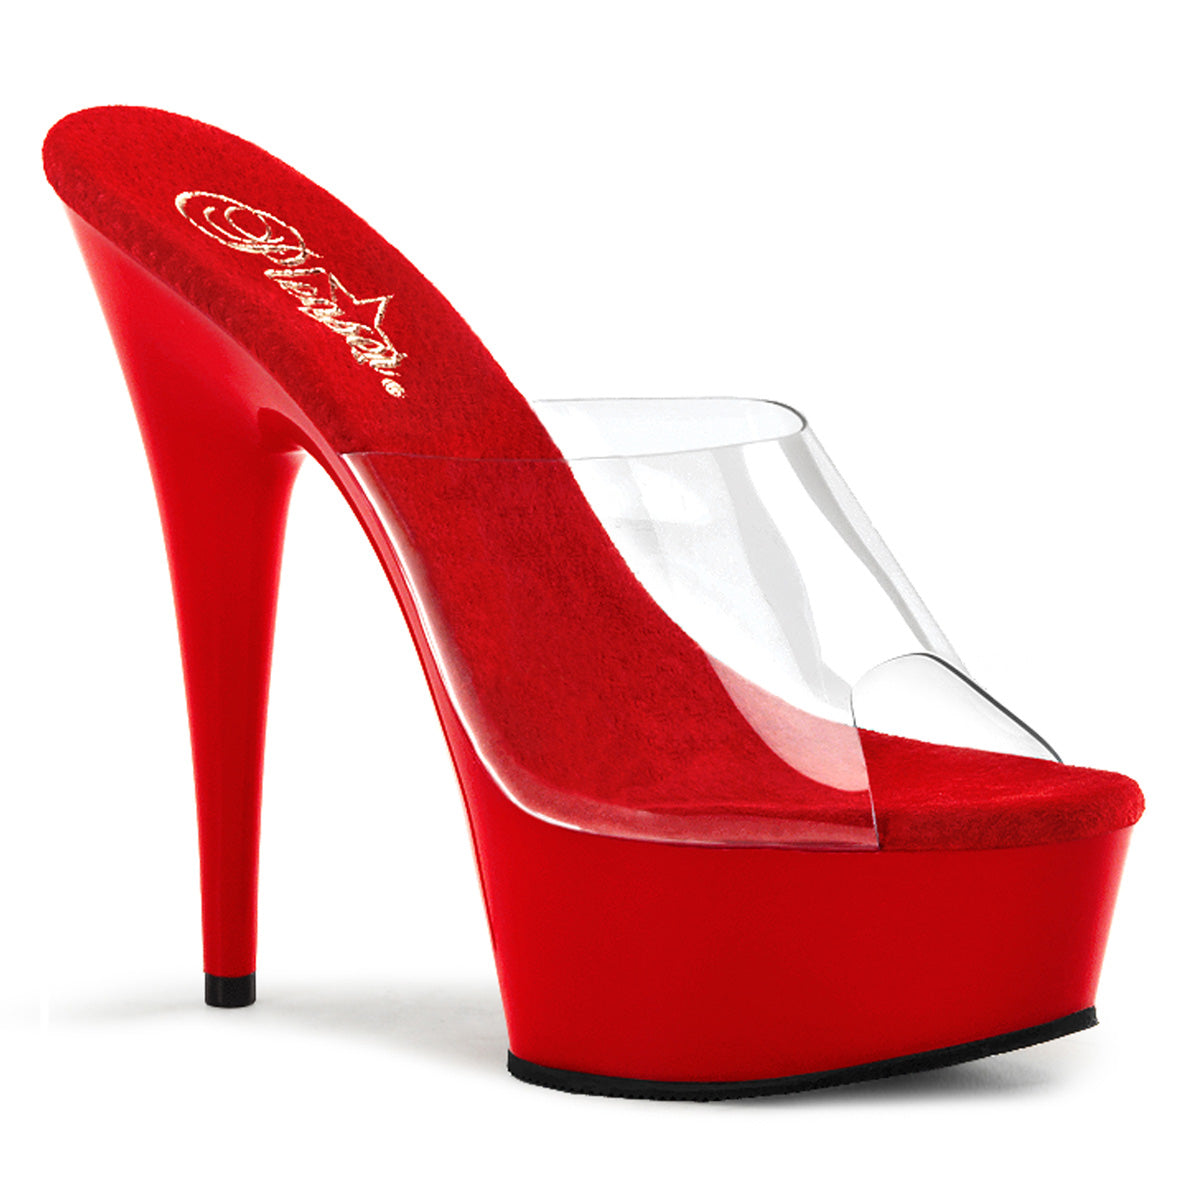 DELIGHT-601 6 Inch Heel Clear and Red Pole Dancing Platforms-Pleaser- Sexy Shoes